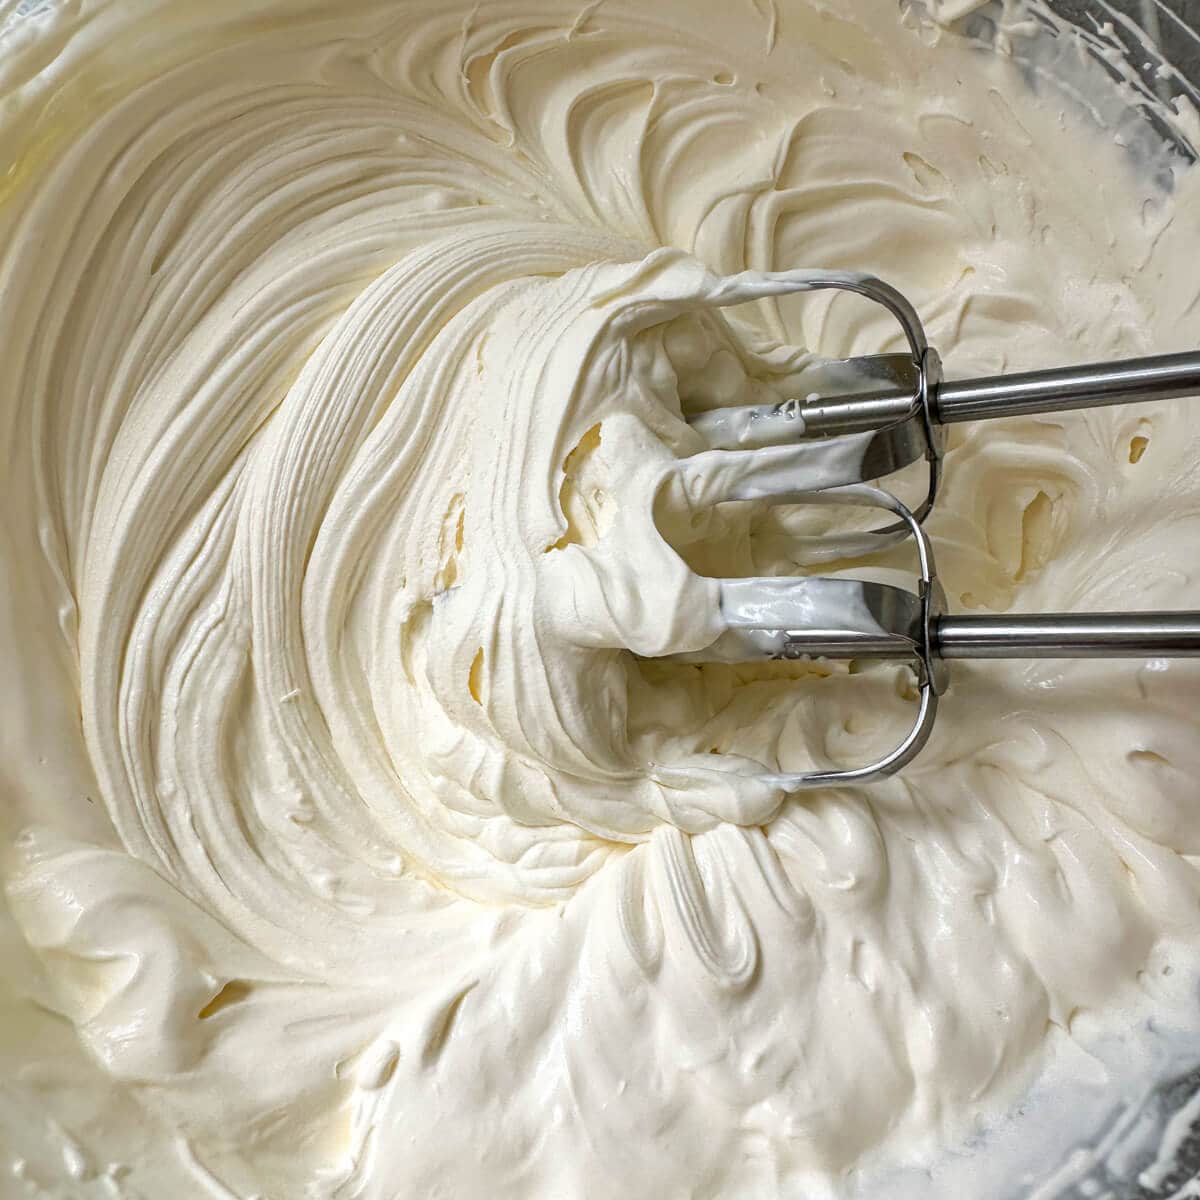 Whipped cream in a mixing bowl. 